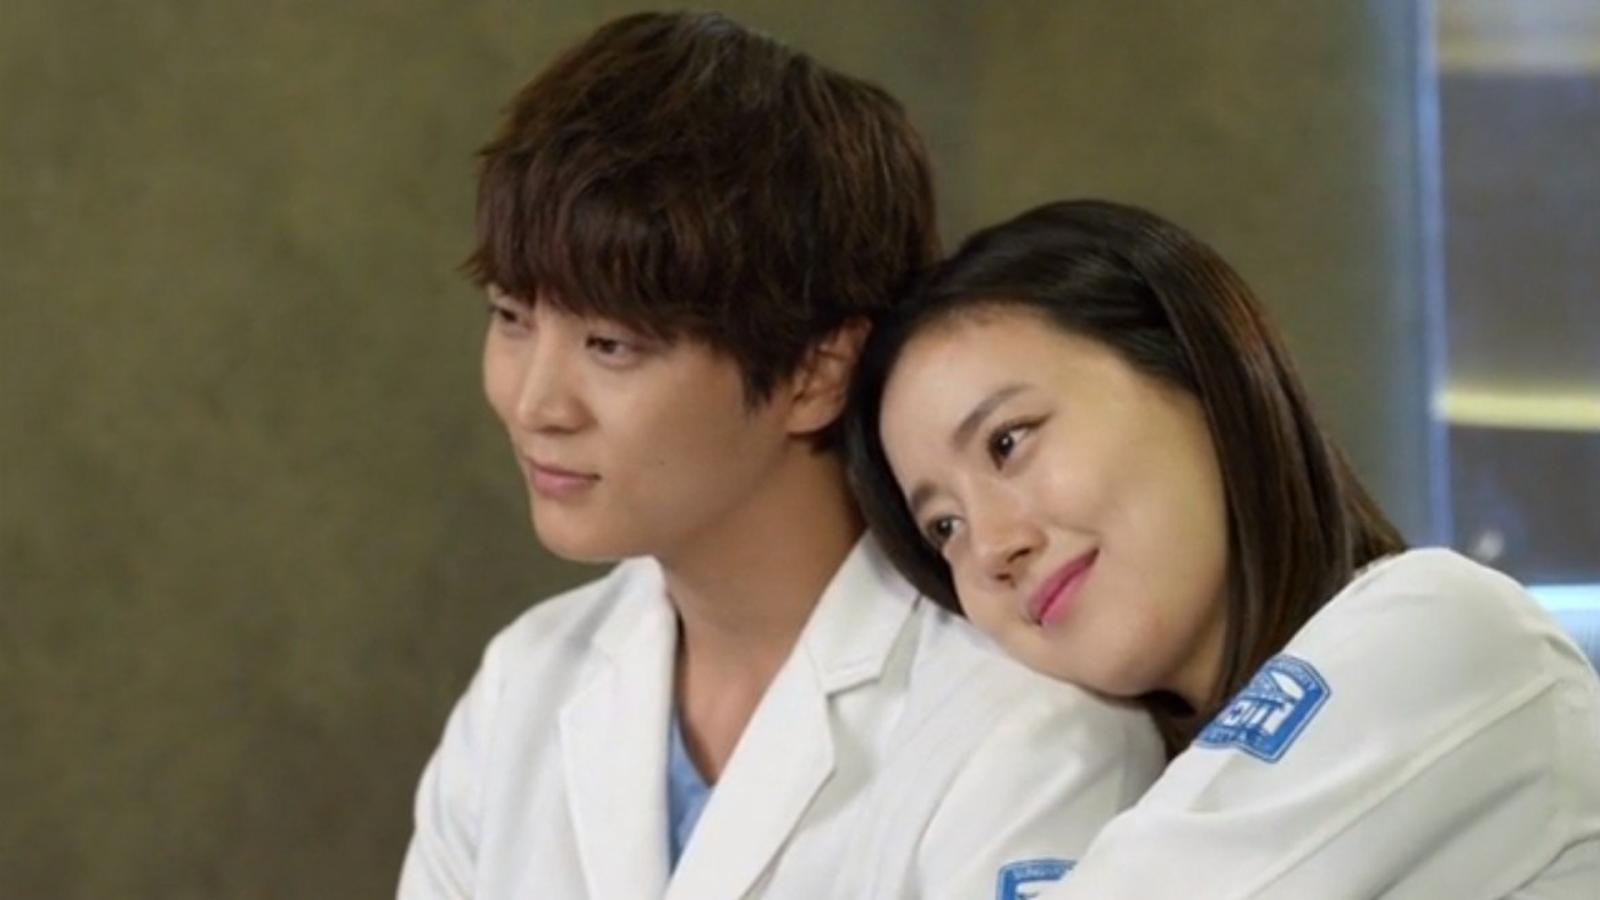 Forget Grey's Anatomy, These 10 Medical K-Dramas Are Better - image 1